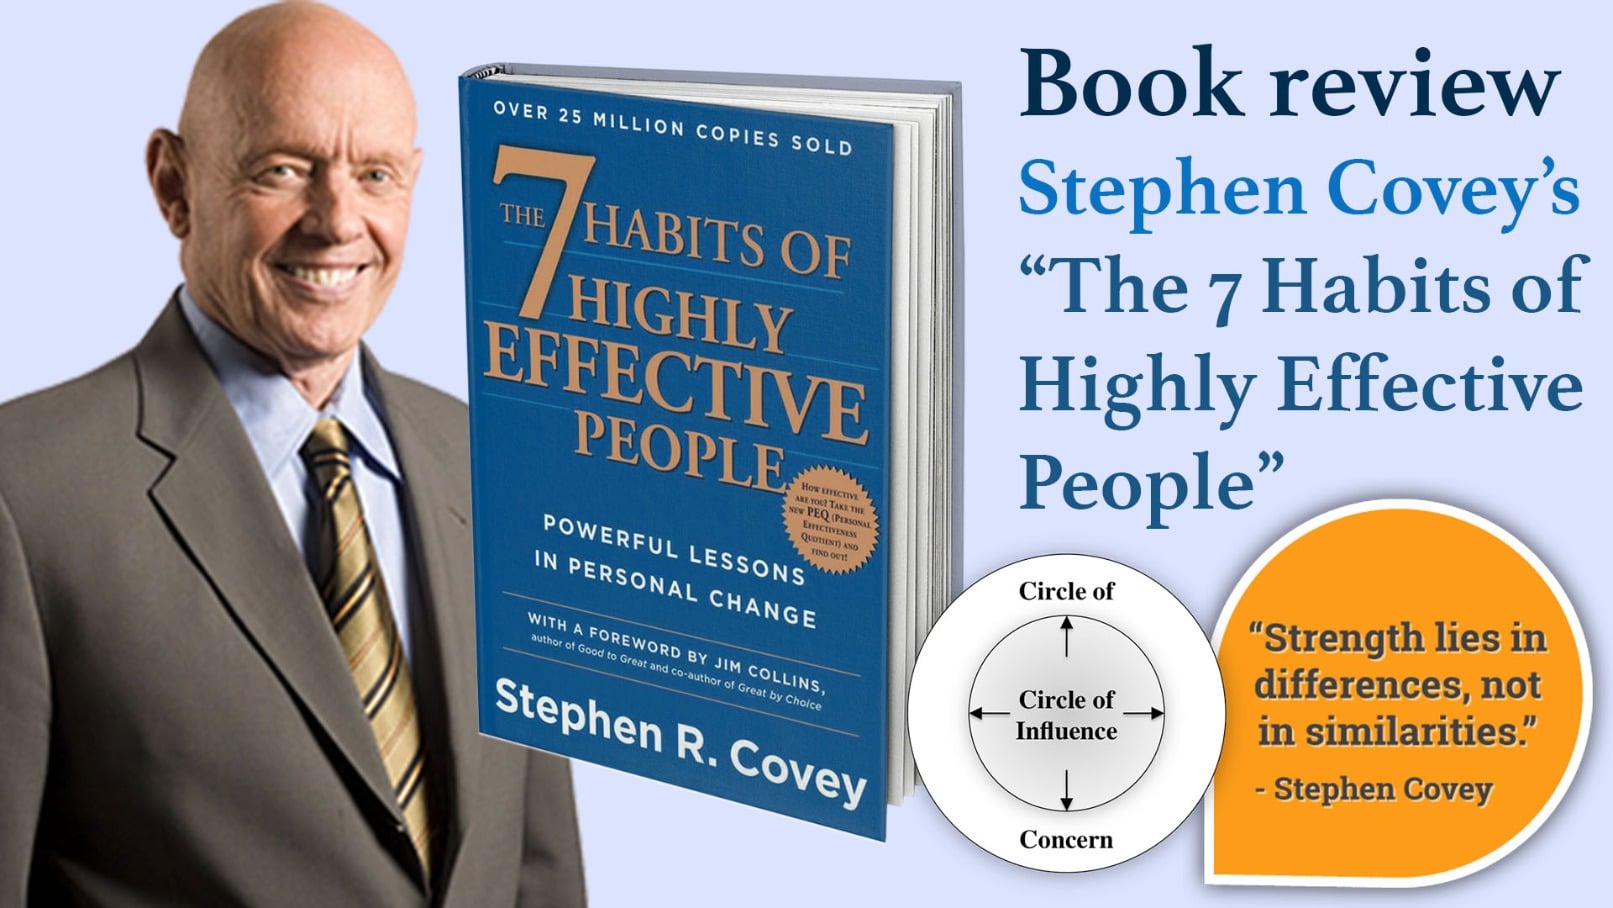 Stephen Covey emphasized the 7 Habits of Highly Effective People